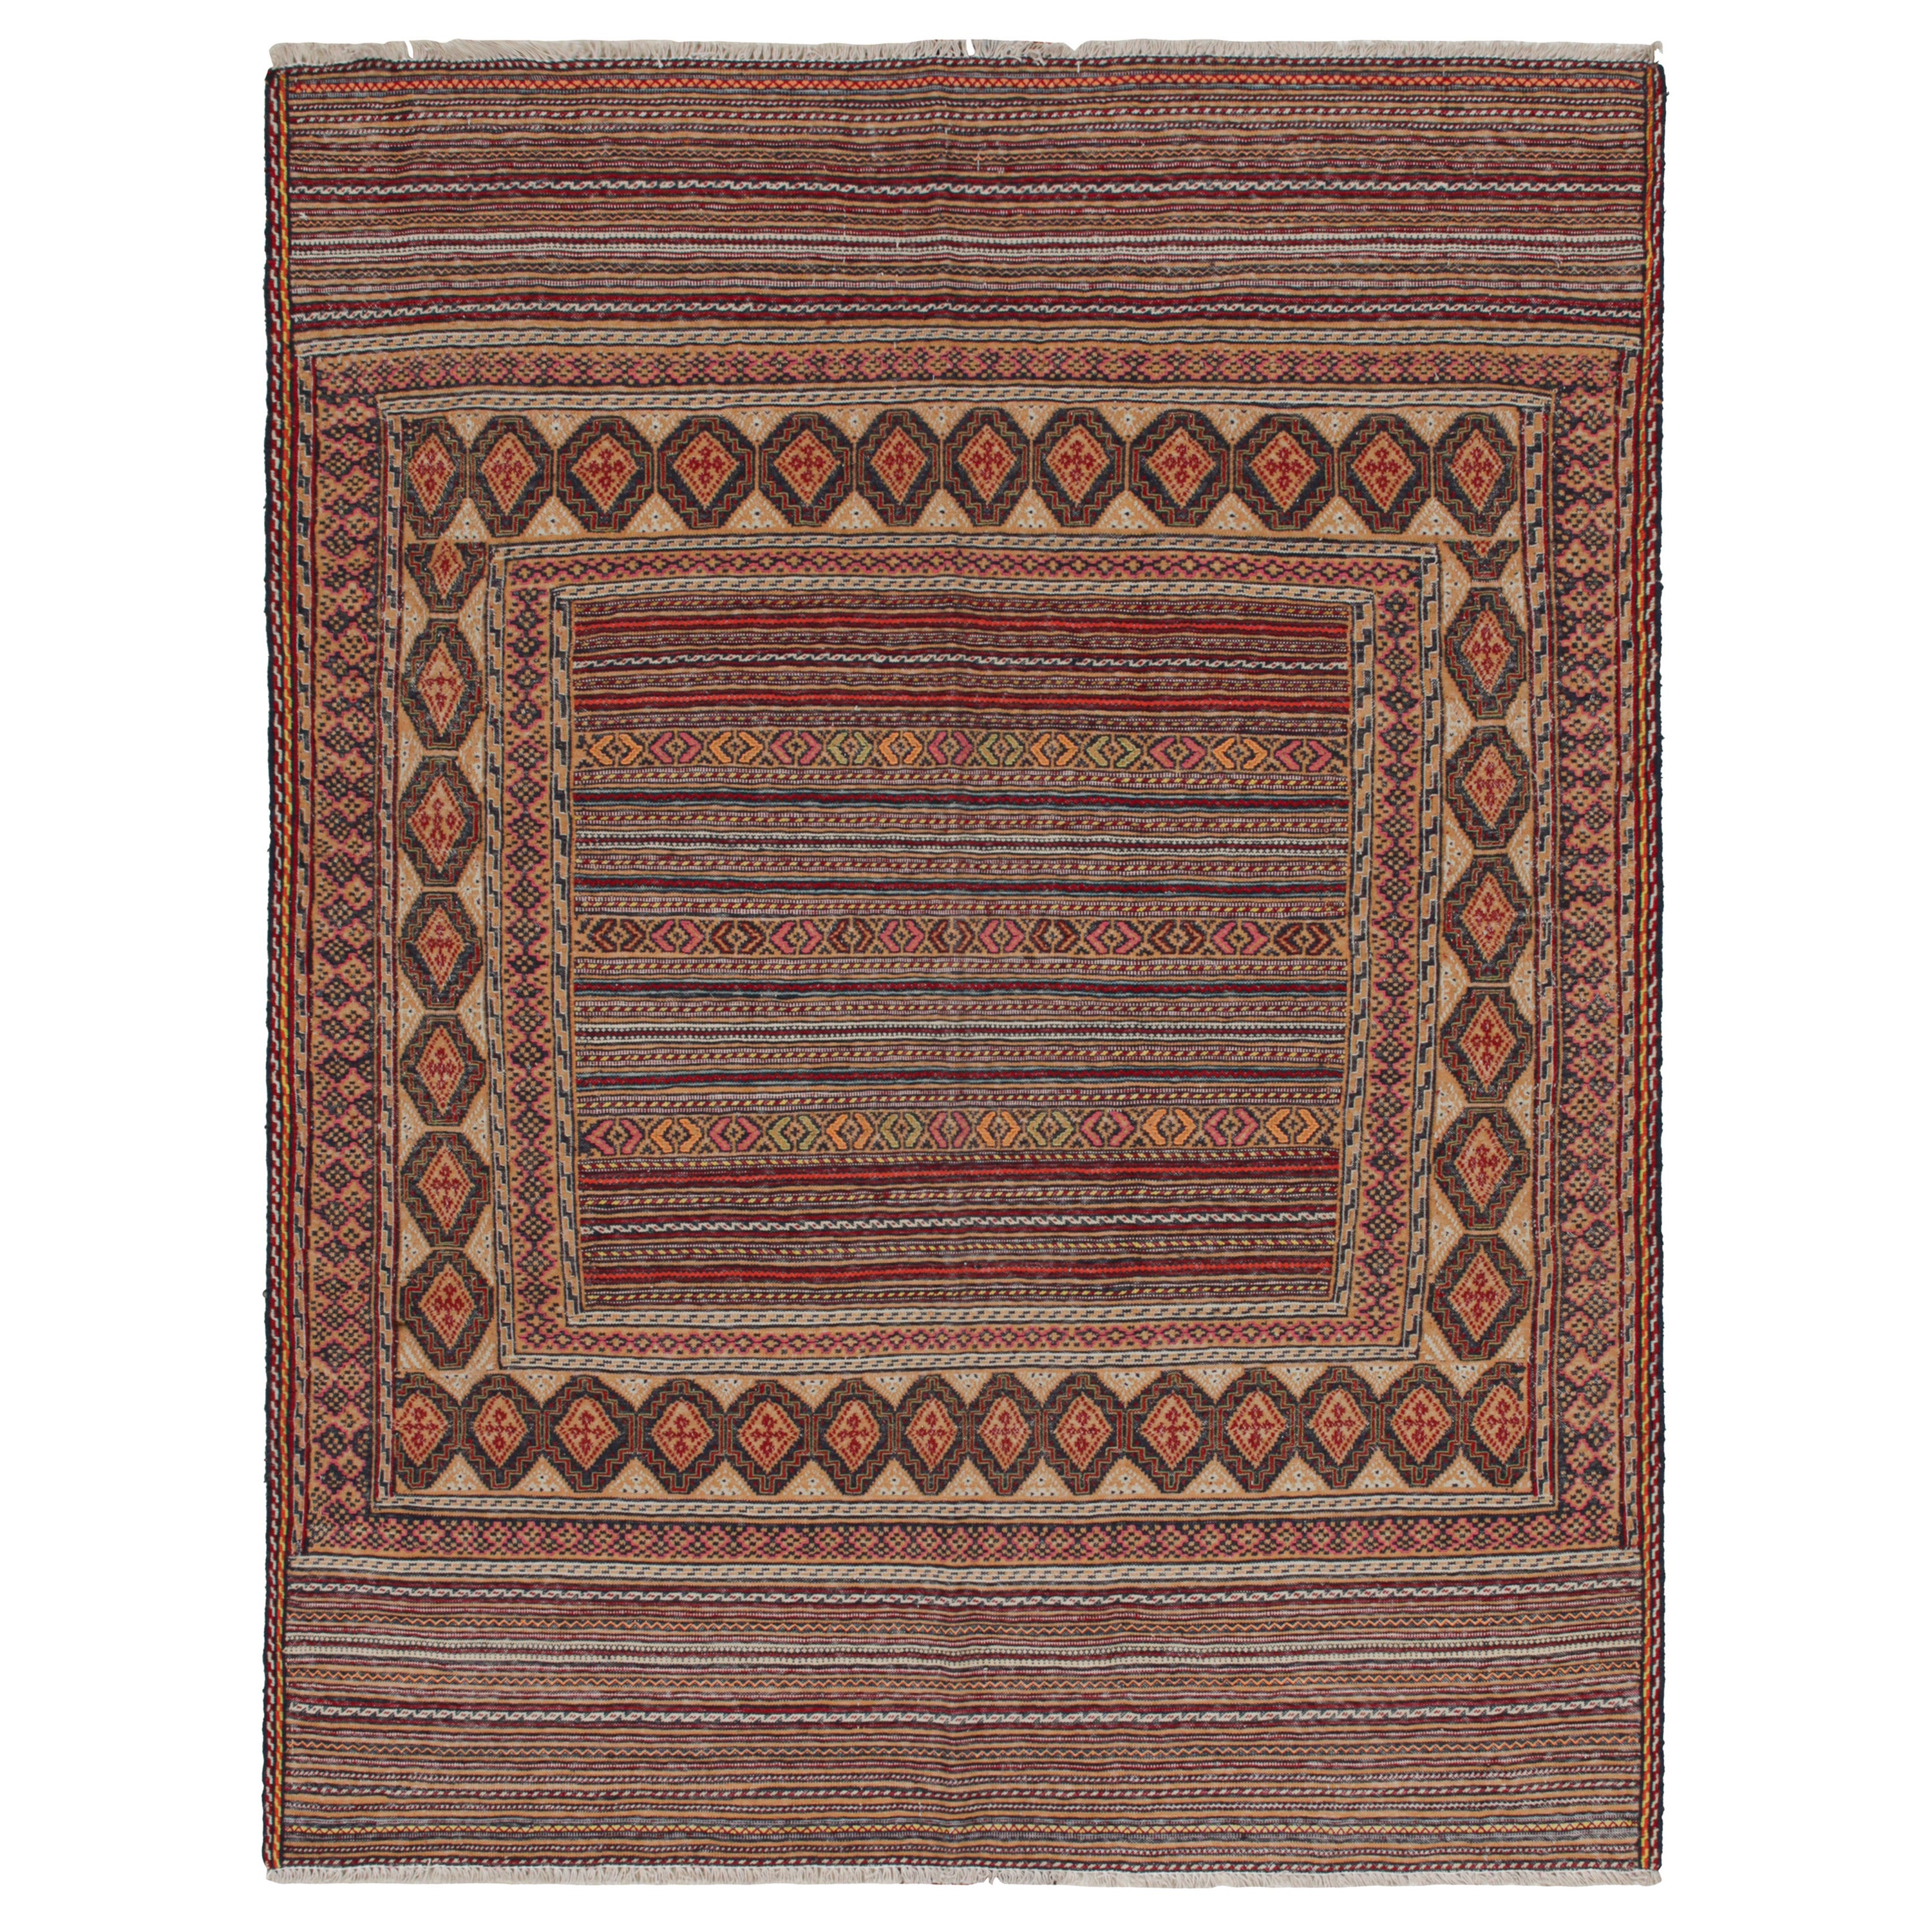 Vintage Baluch Kilim in Beige-Brown with Geometric Patterns, from Rug & Kilim